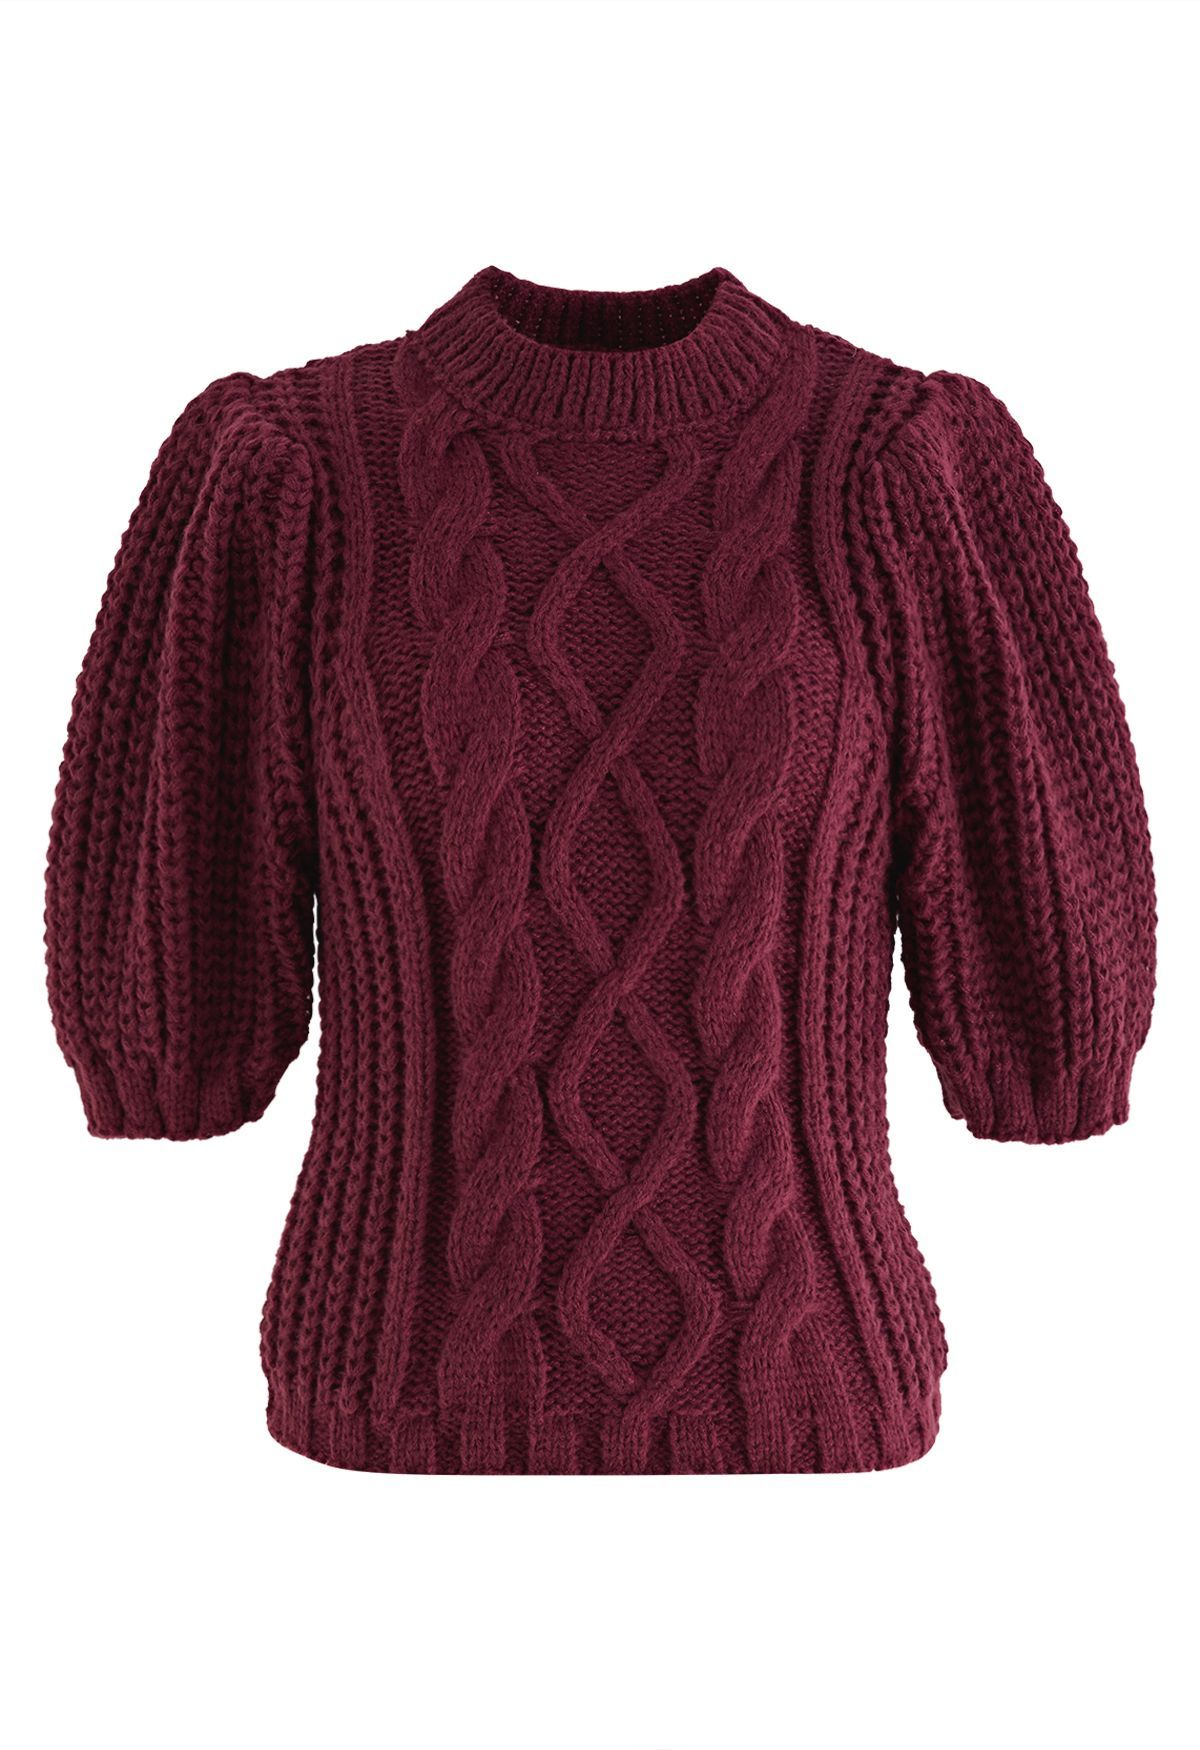 Bubble Sleeve Braided Ribbed Sweater in Burgundy | Chicwish